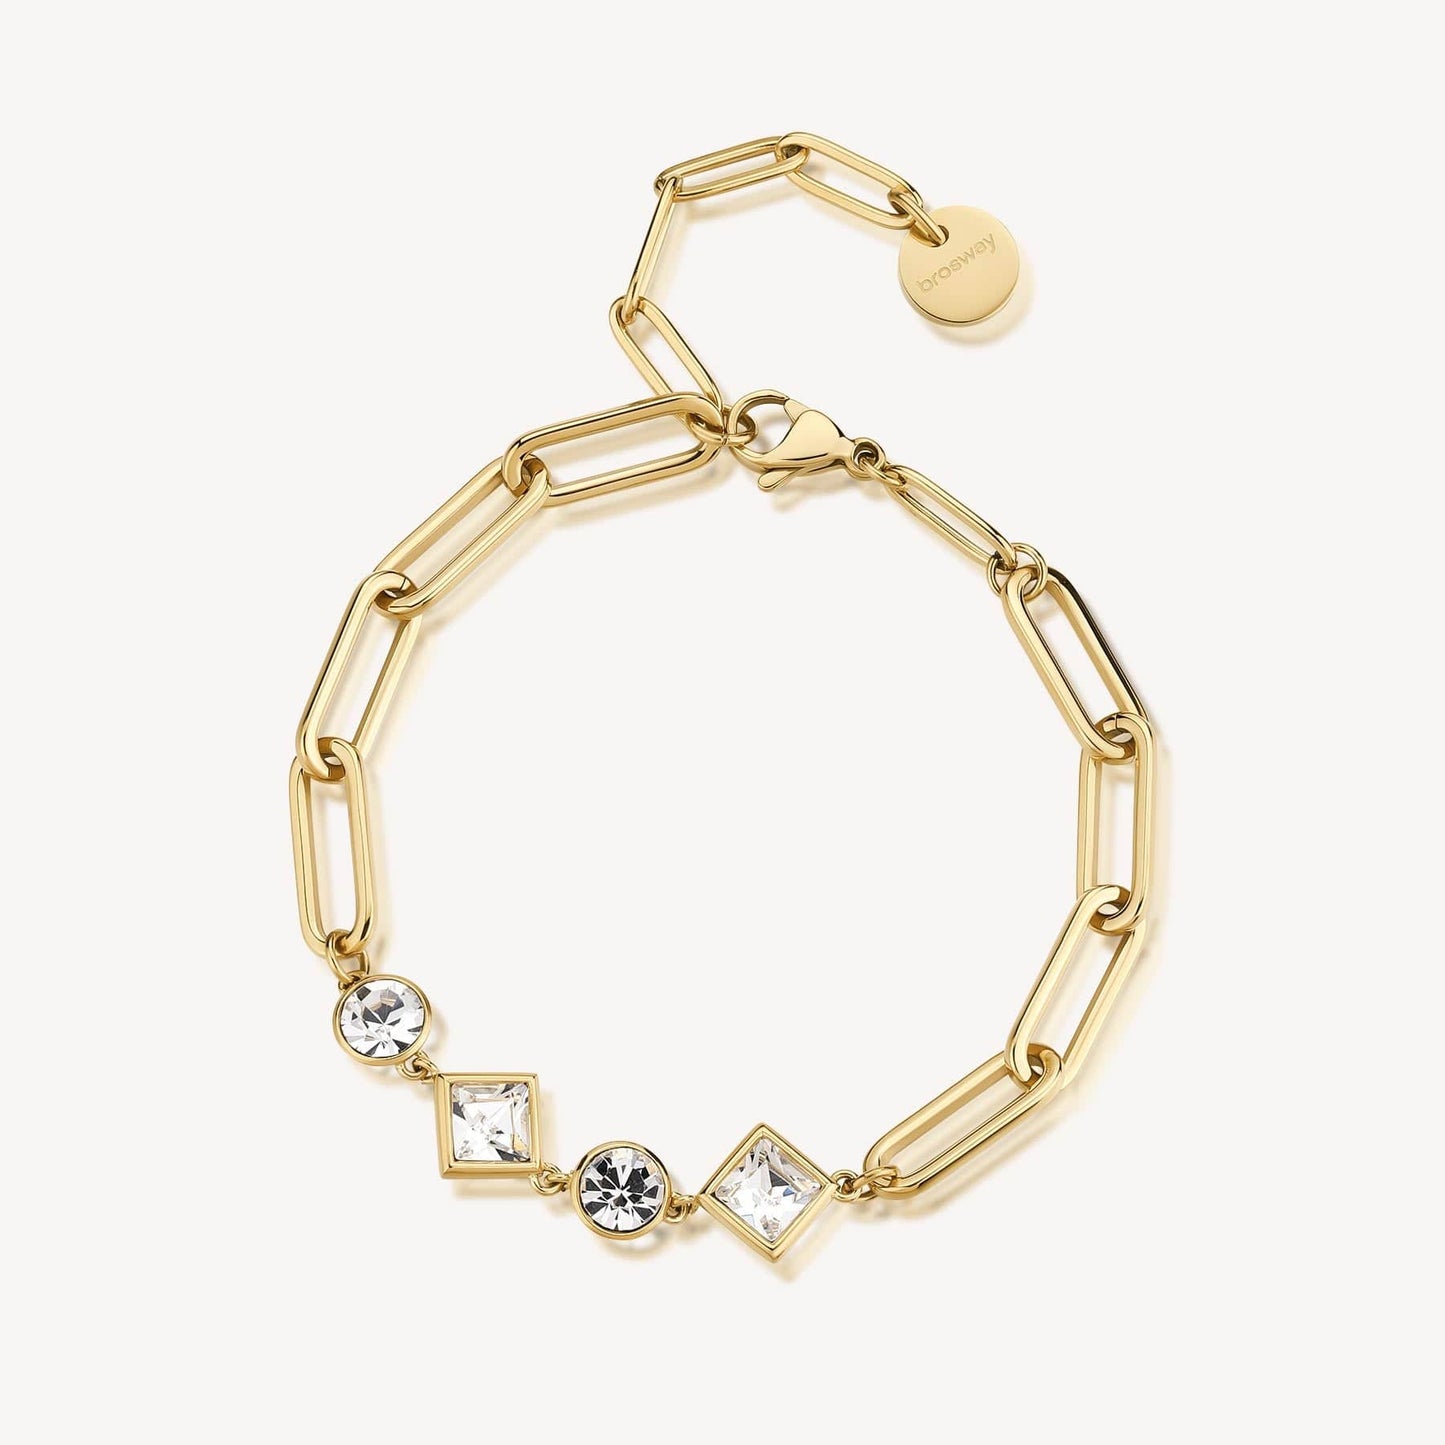 BRC-SS Stainless Steel Gold Tone Oval Link Chain with Crystals Bracelet